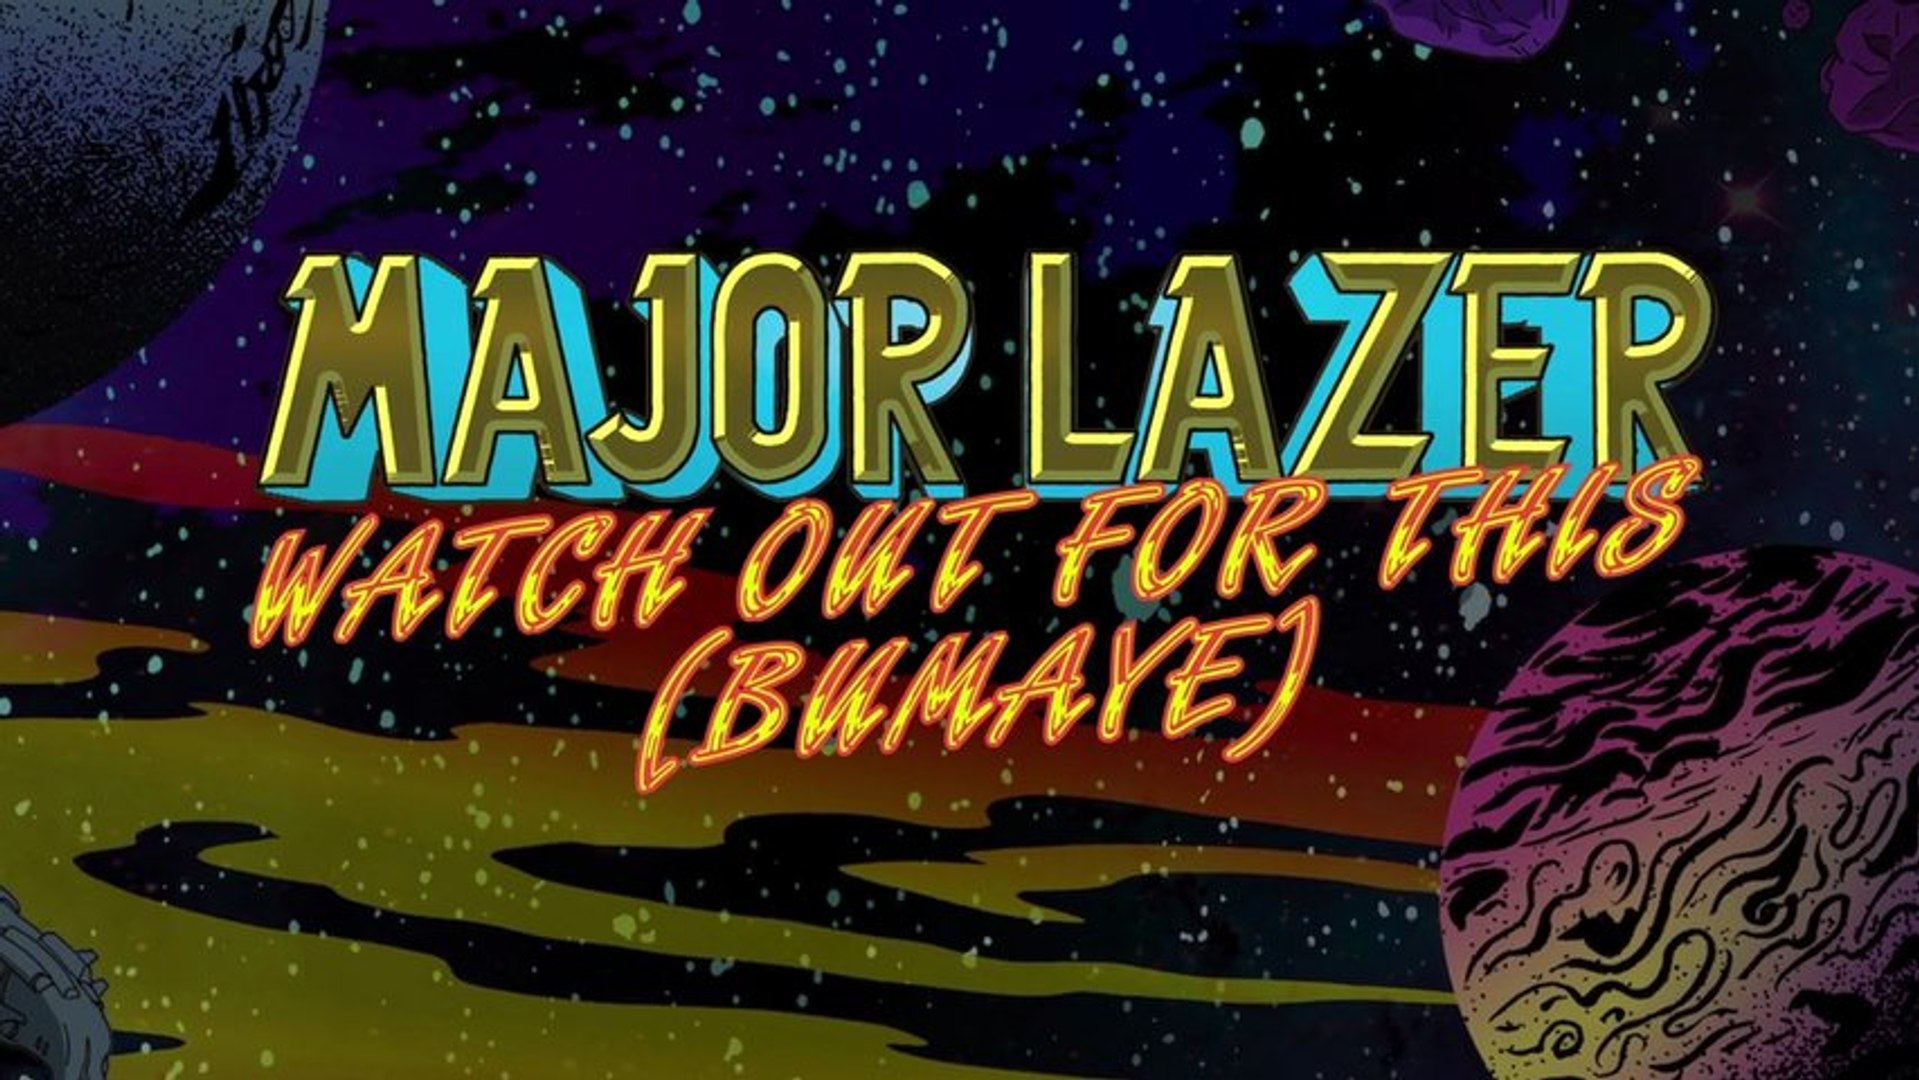 Major Lazer watch out for this. Watch out for this (Bumaye). Major Lazer - Bumaye (watch out for this) (Shintek's Bootleg) Дата релиза. Watch out for this